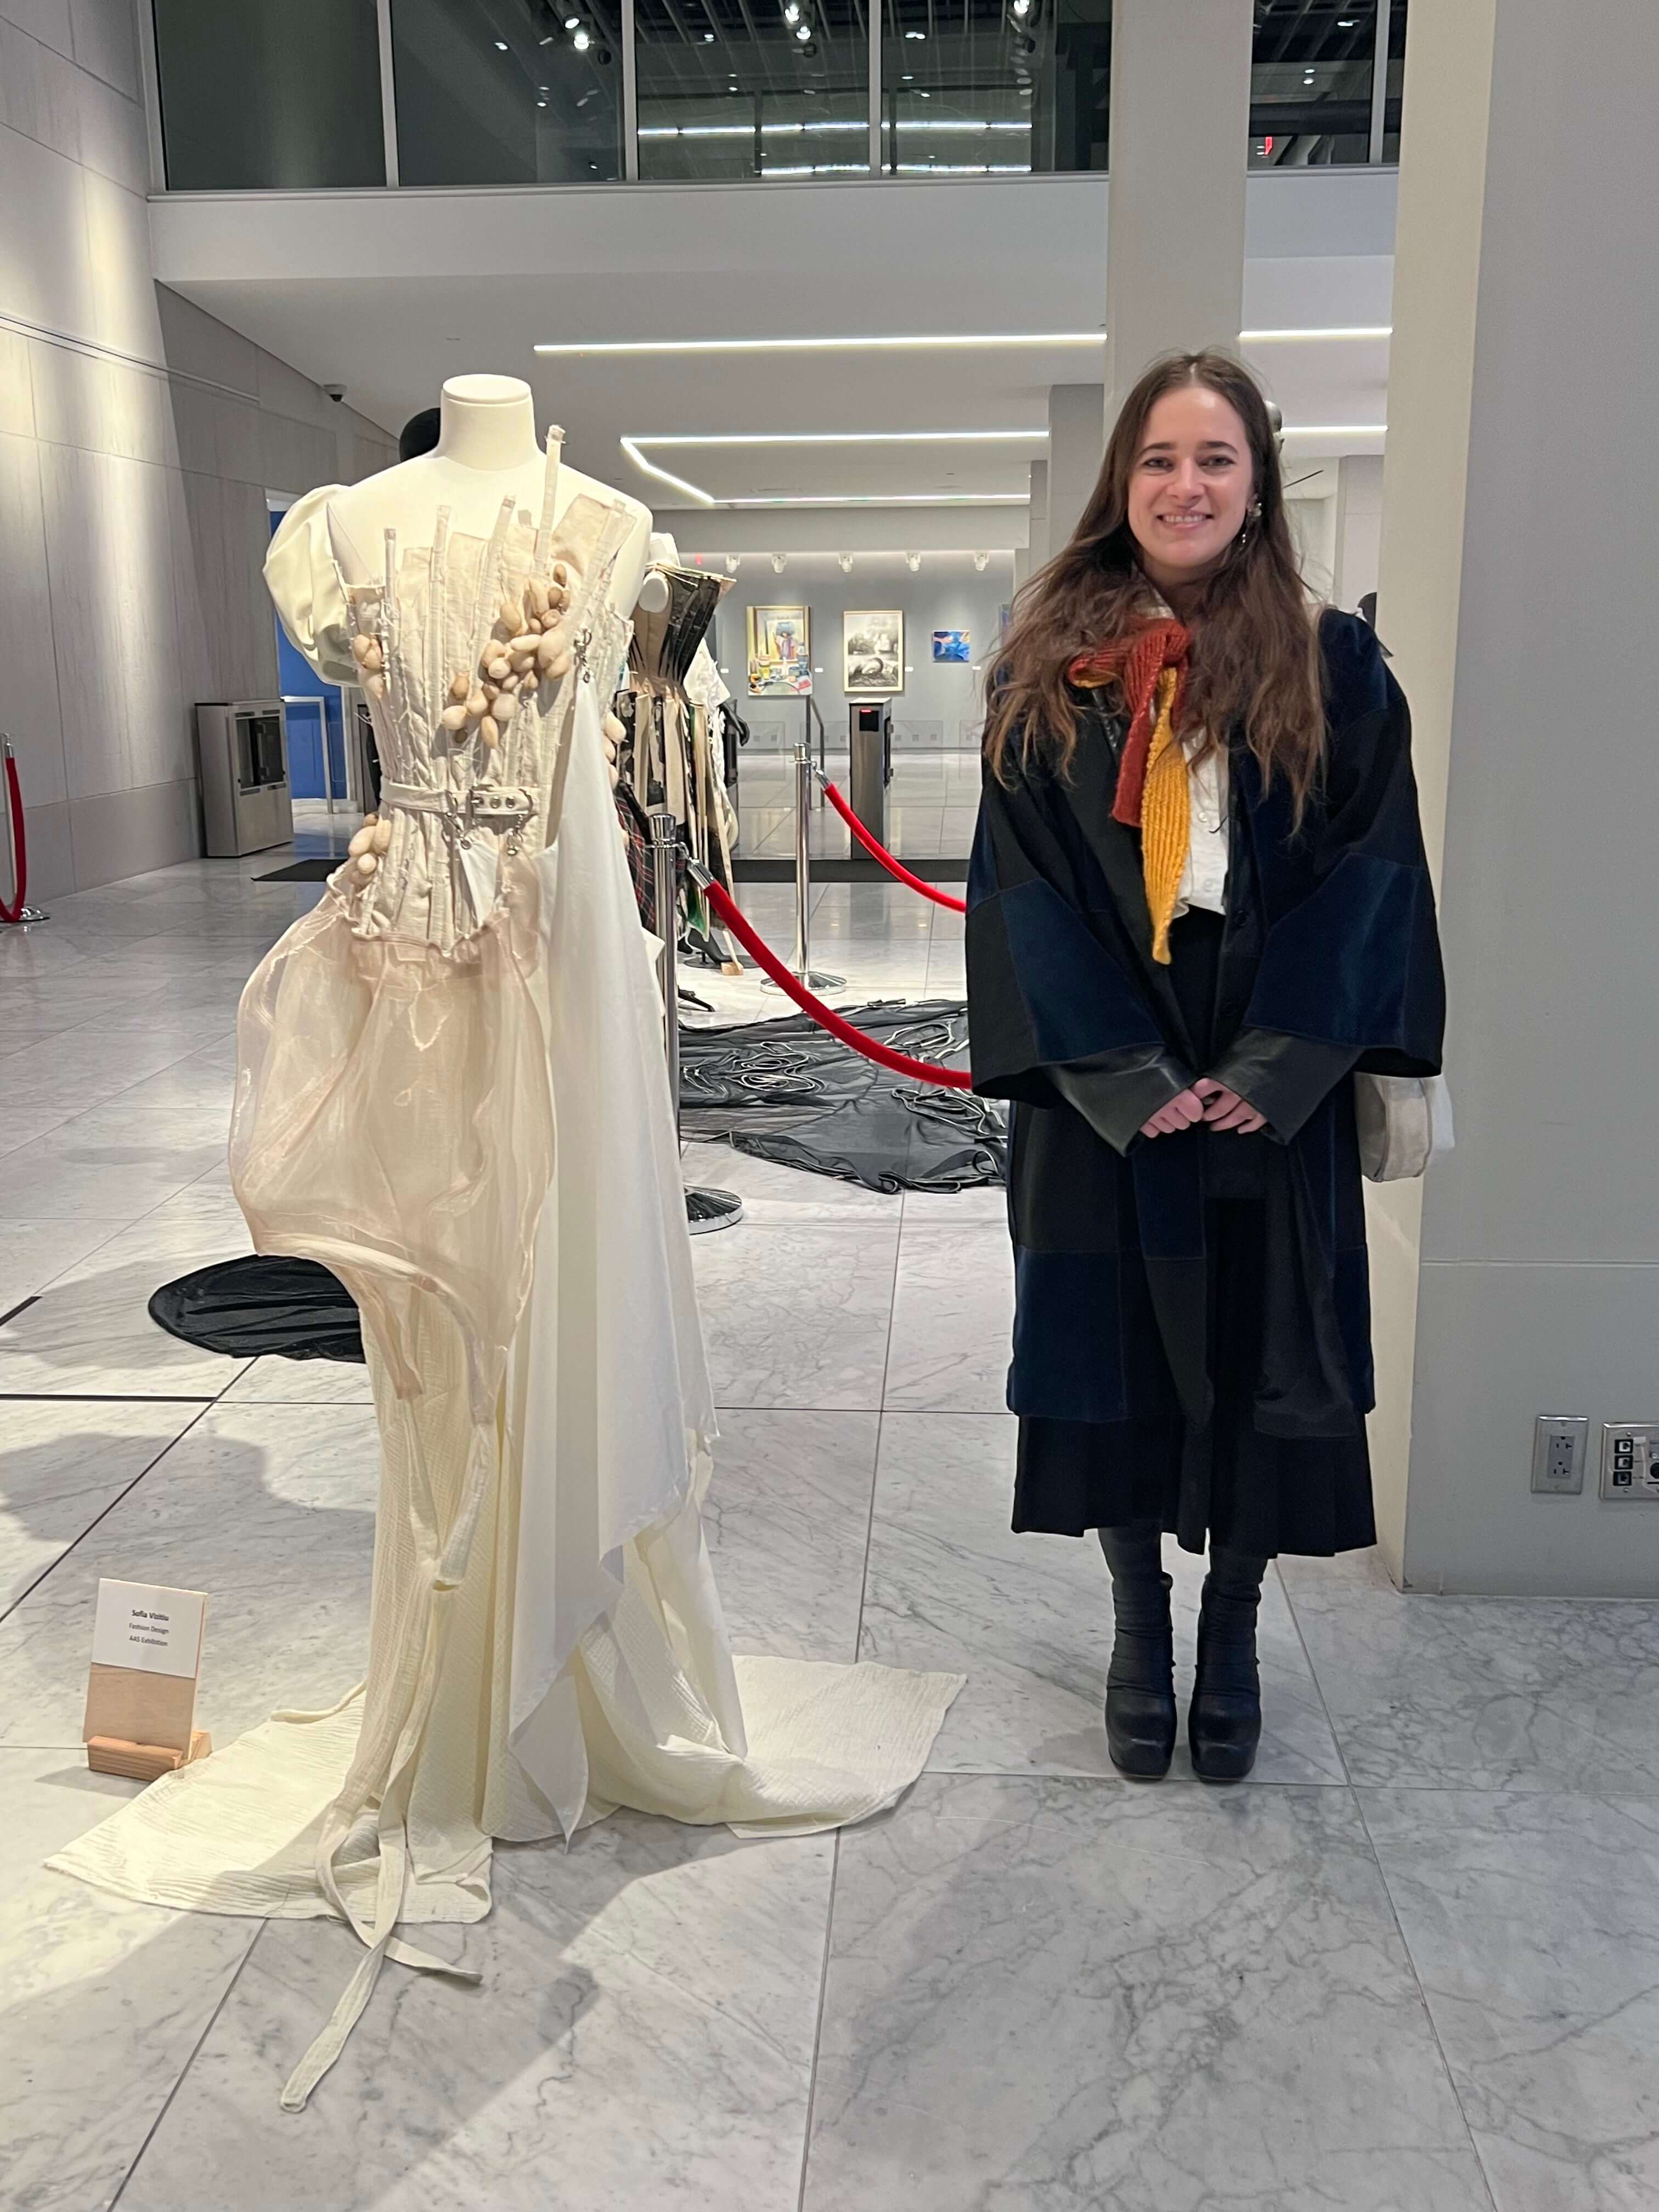 Sophia standing next to one of her fashion creations